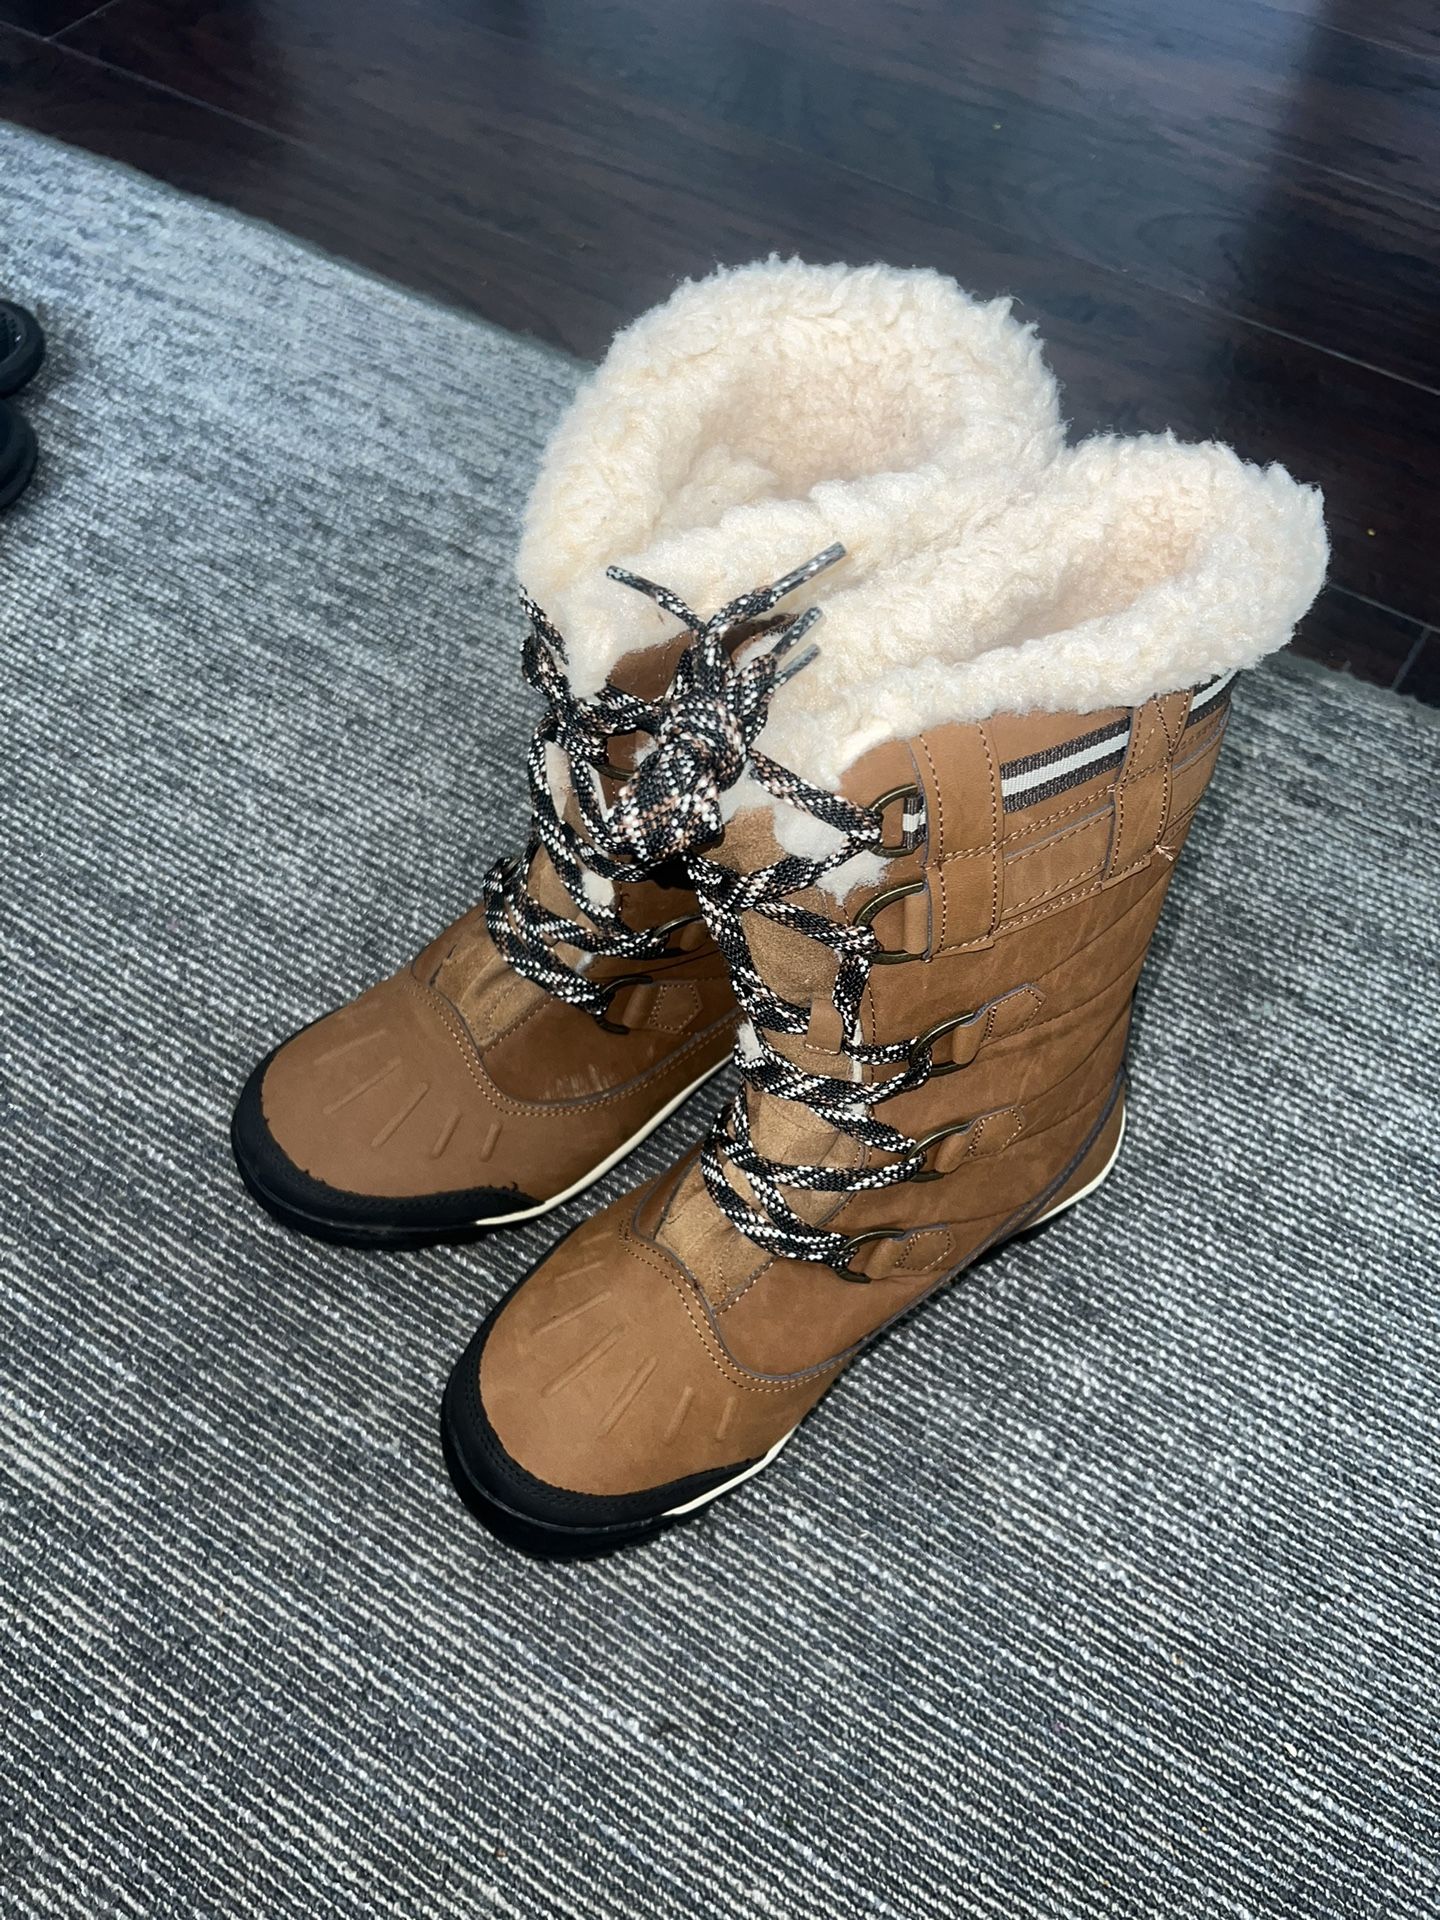 SNOW BOOTS WOMENS SIZE 12 